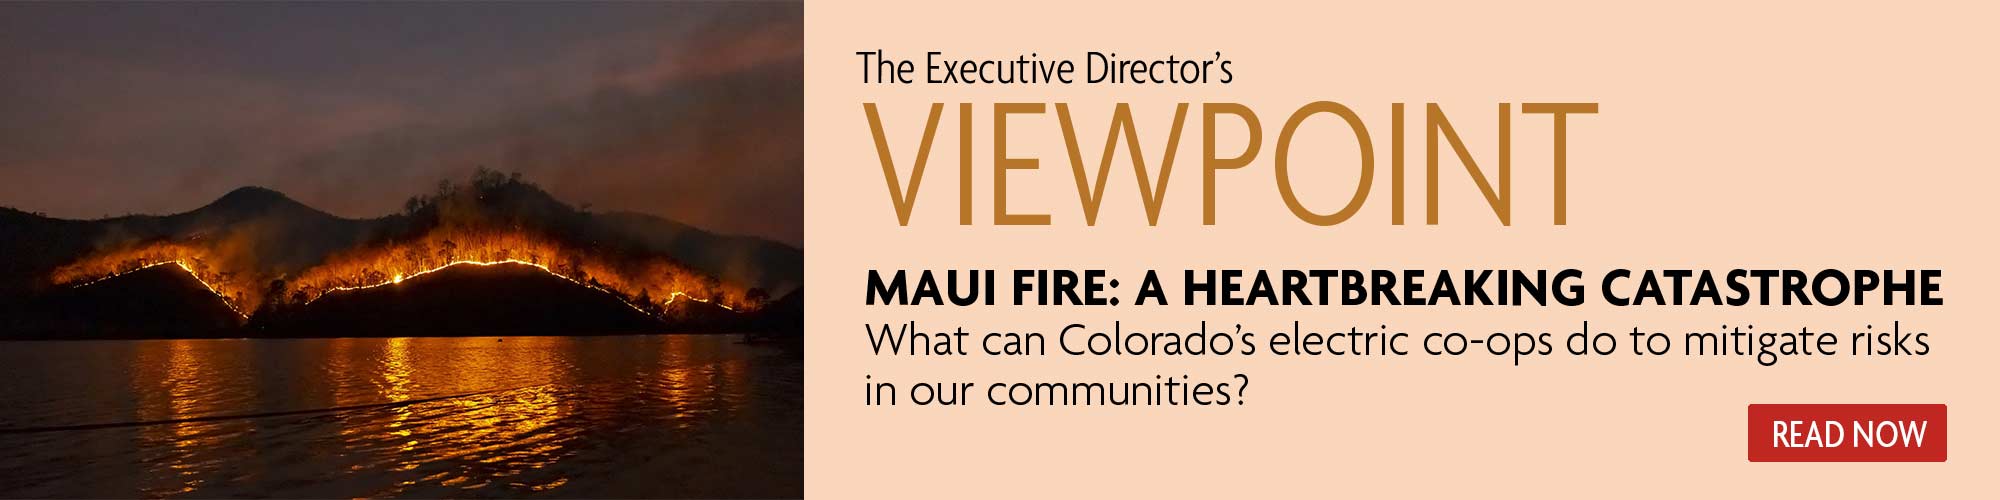 Viewpoint - Mitigating wildfires